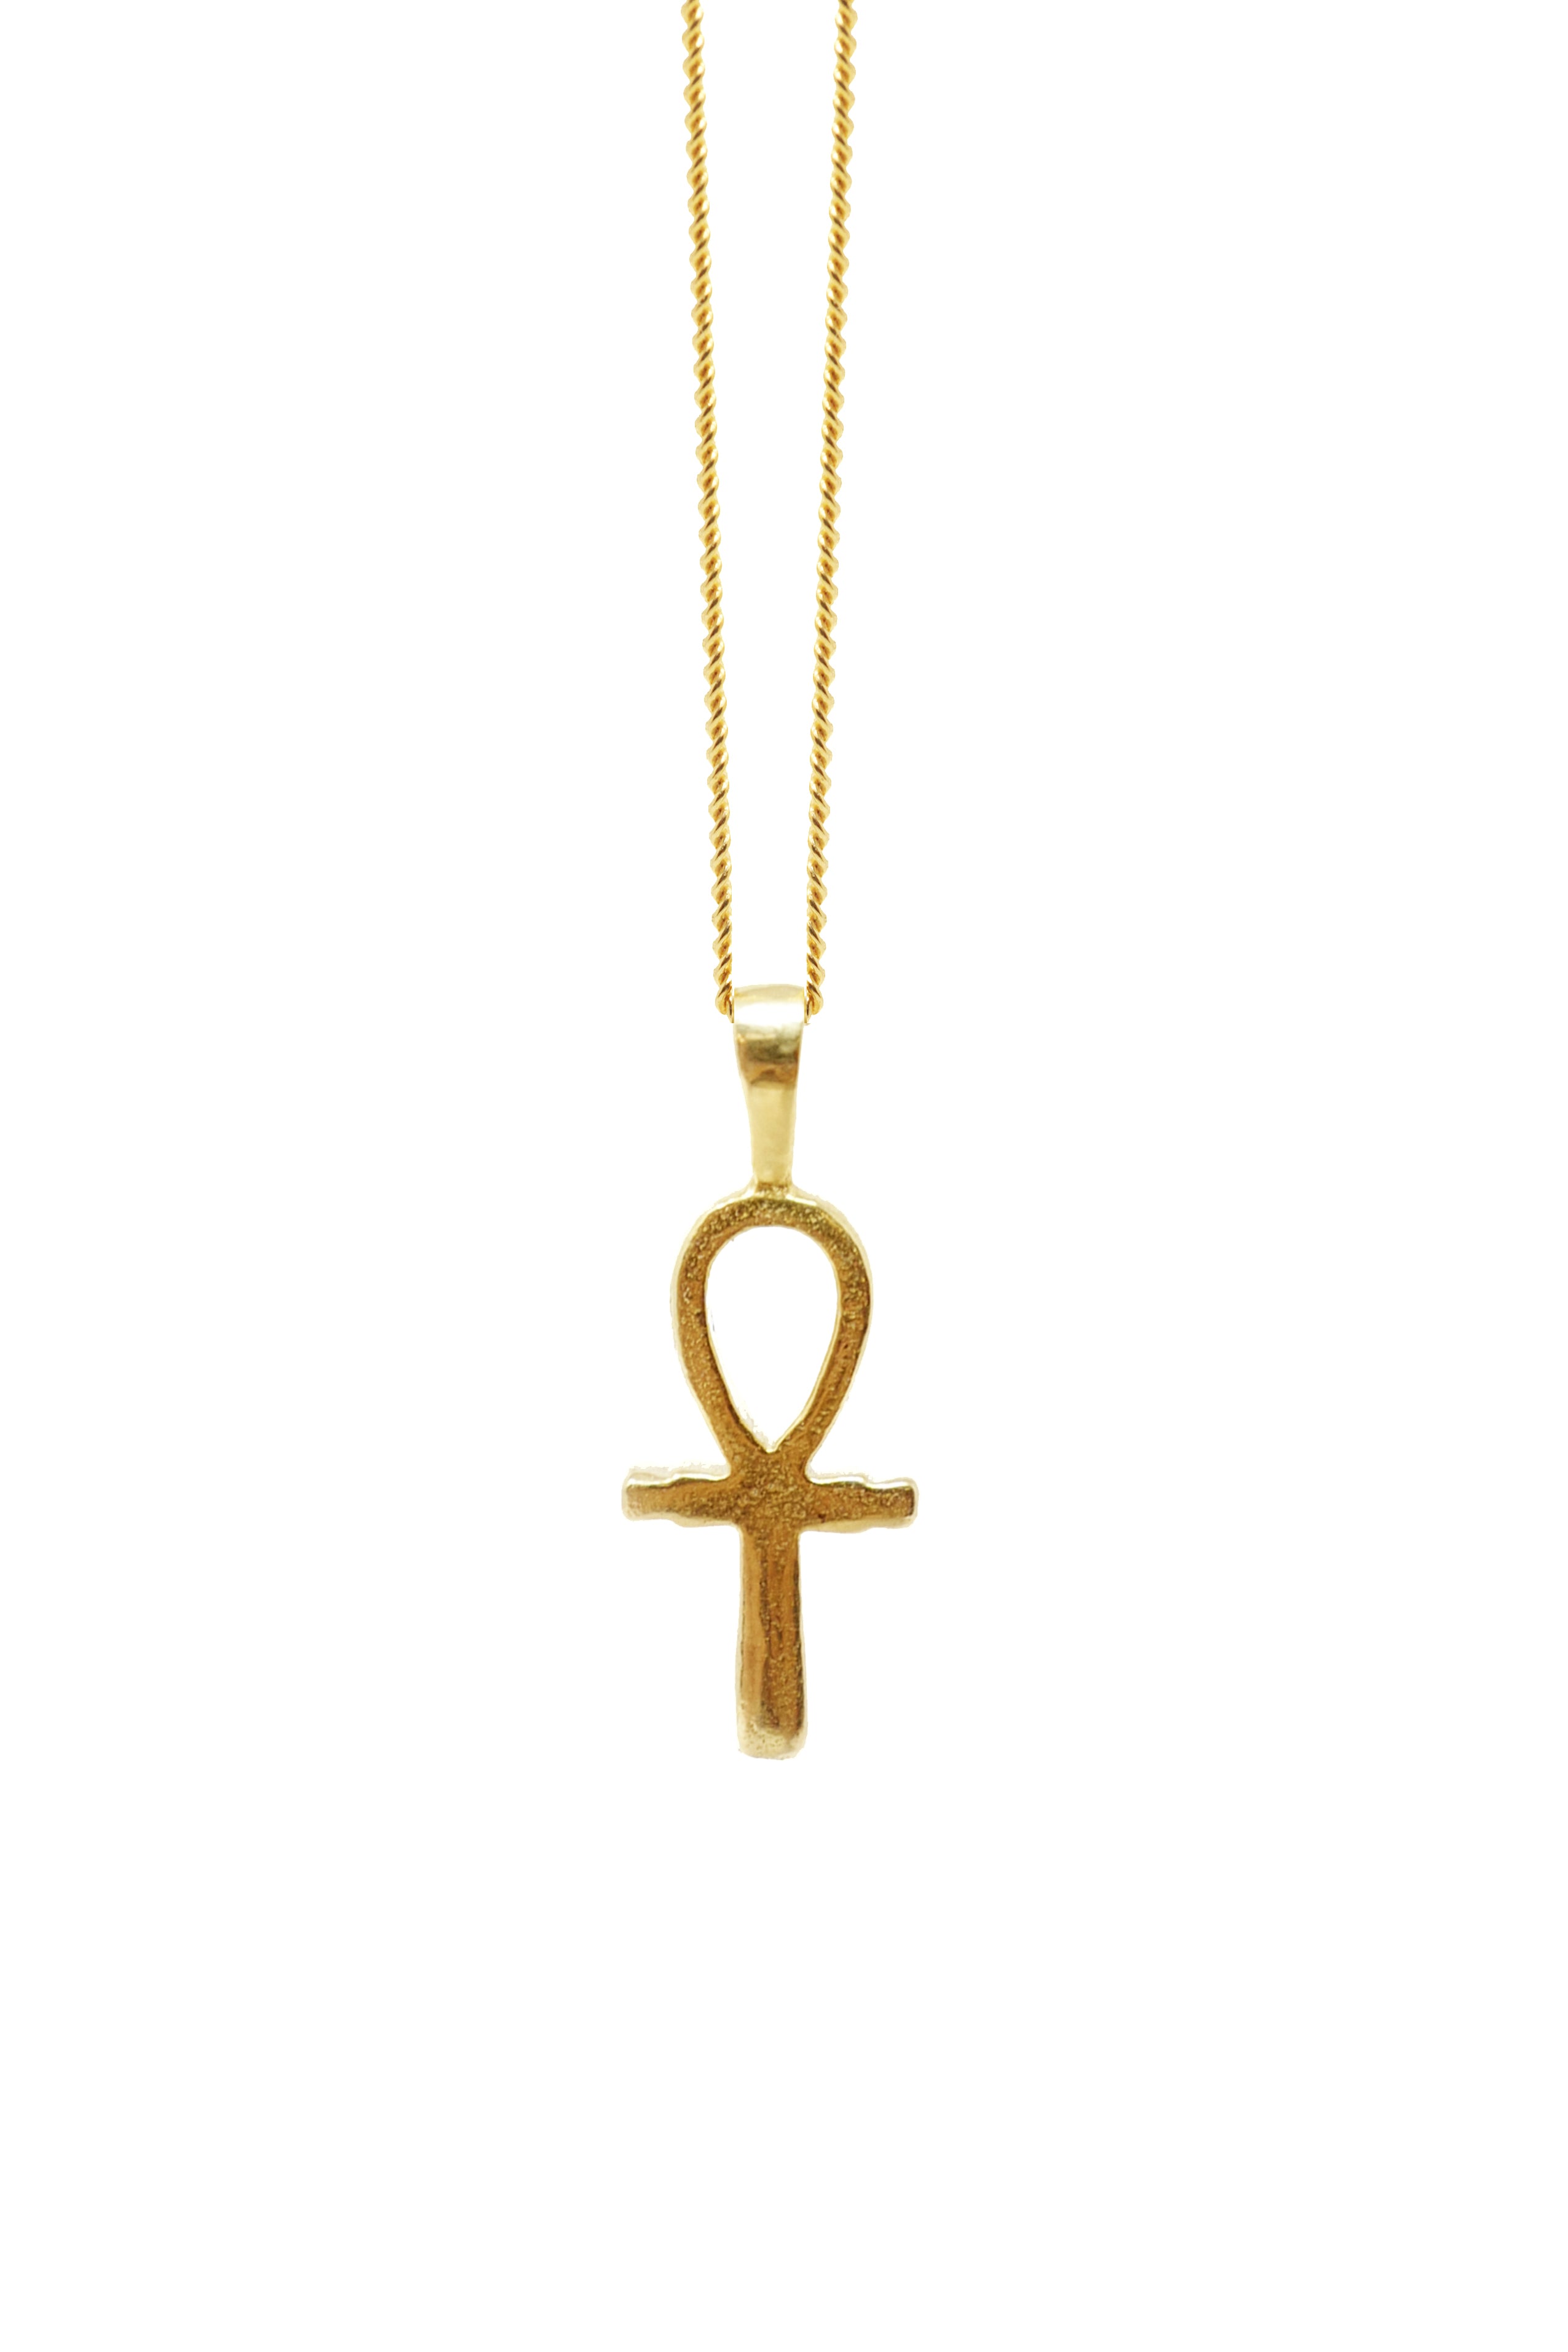 Marquesina Sufijo Preciso THE ANKH Necklace – omiwoods